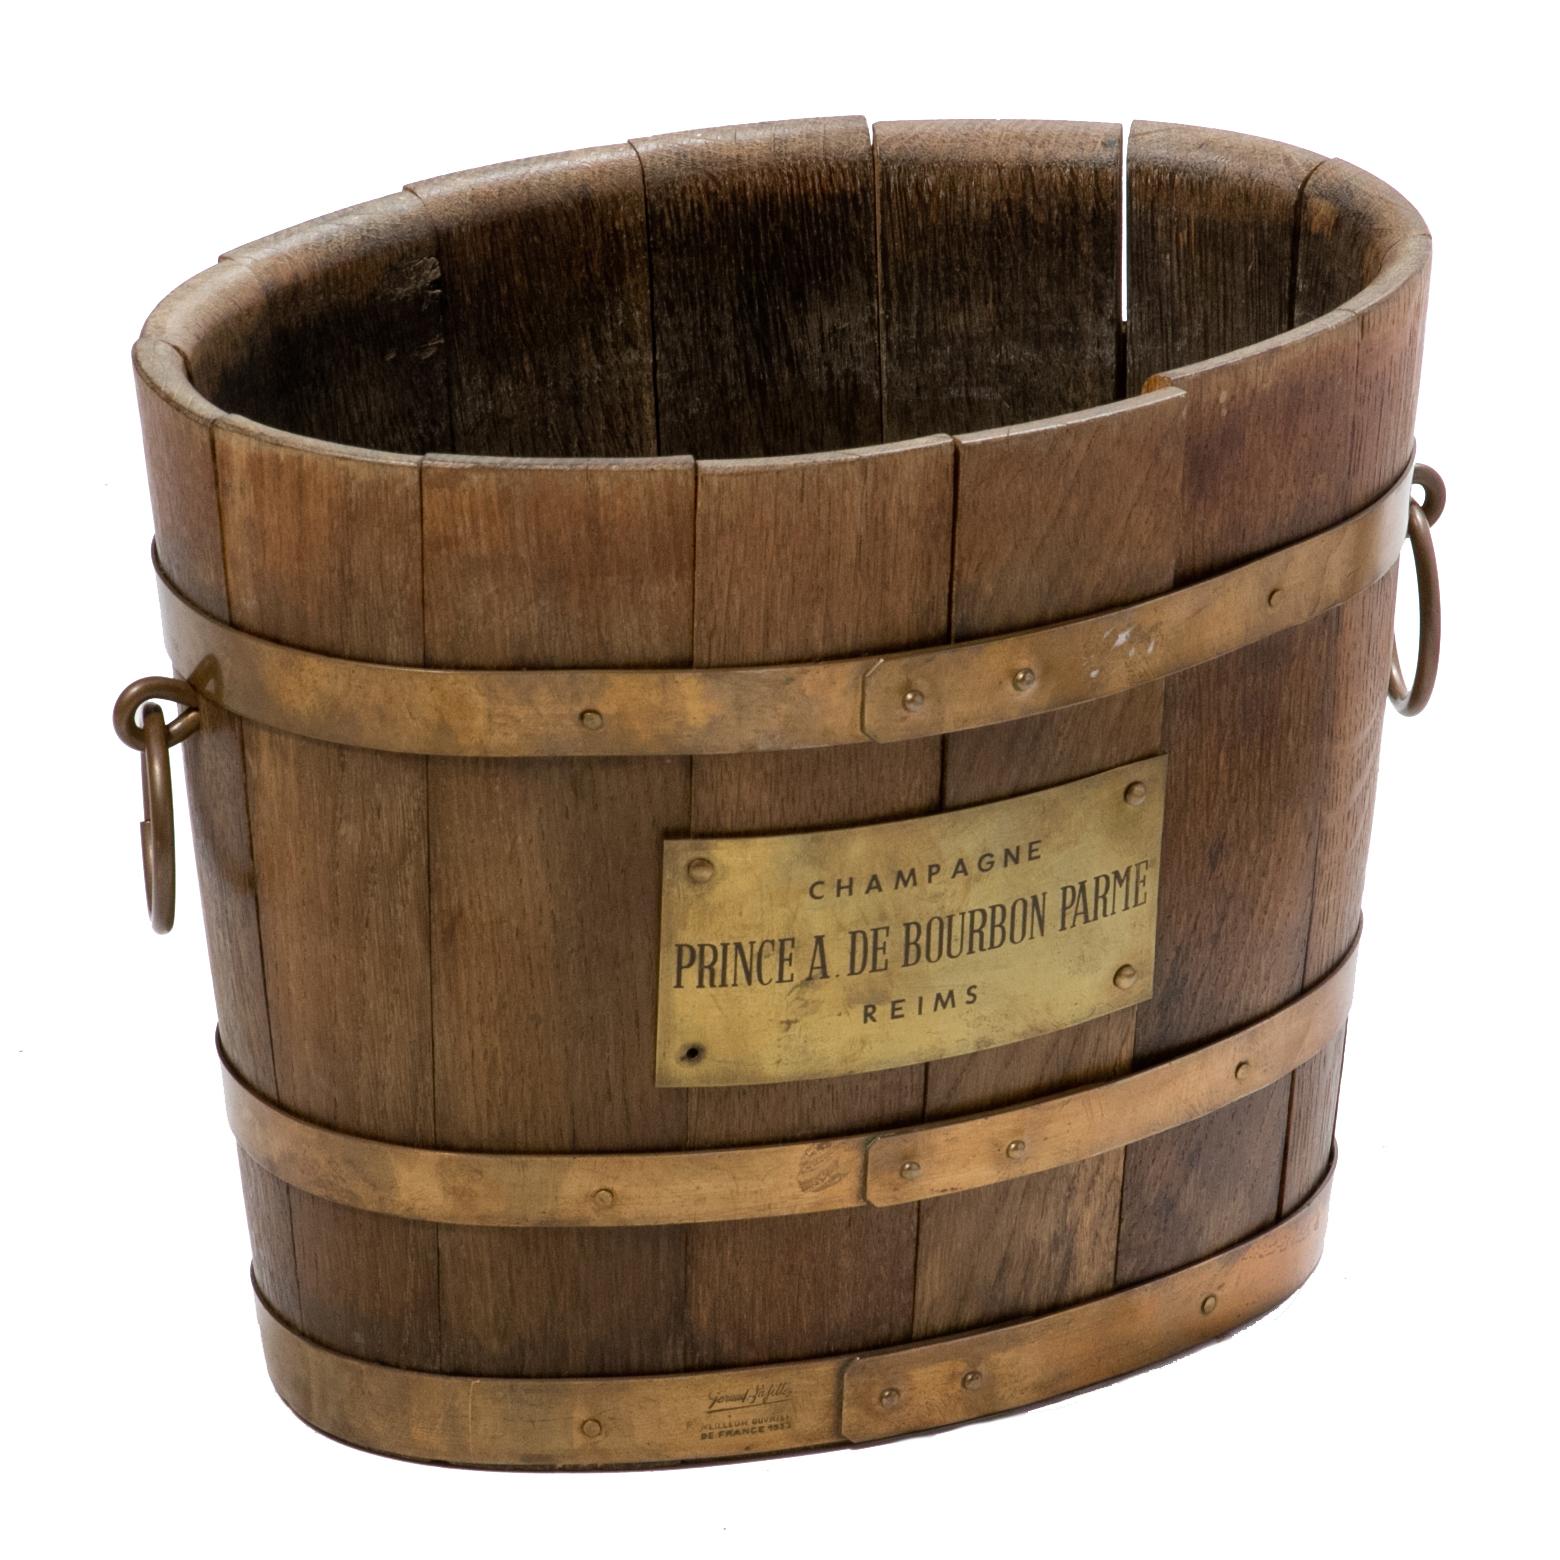 Vintage Wood Champagne Bucket with Brass Handles and Label from France